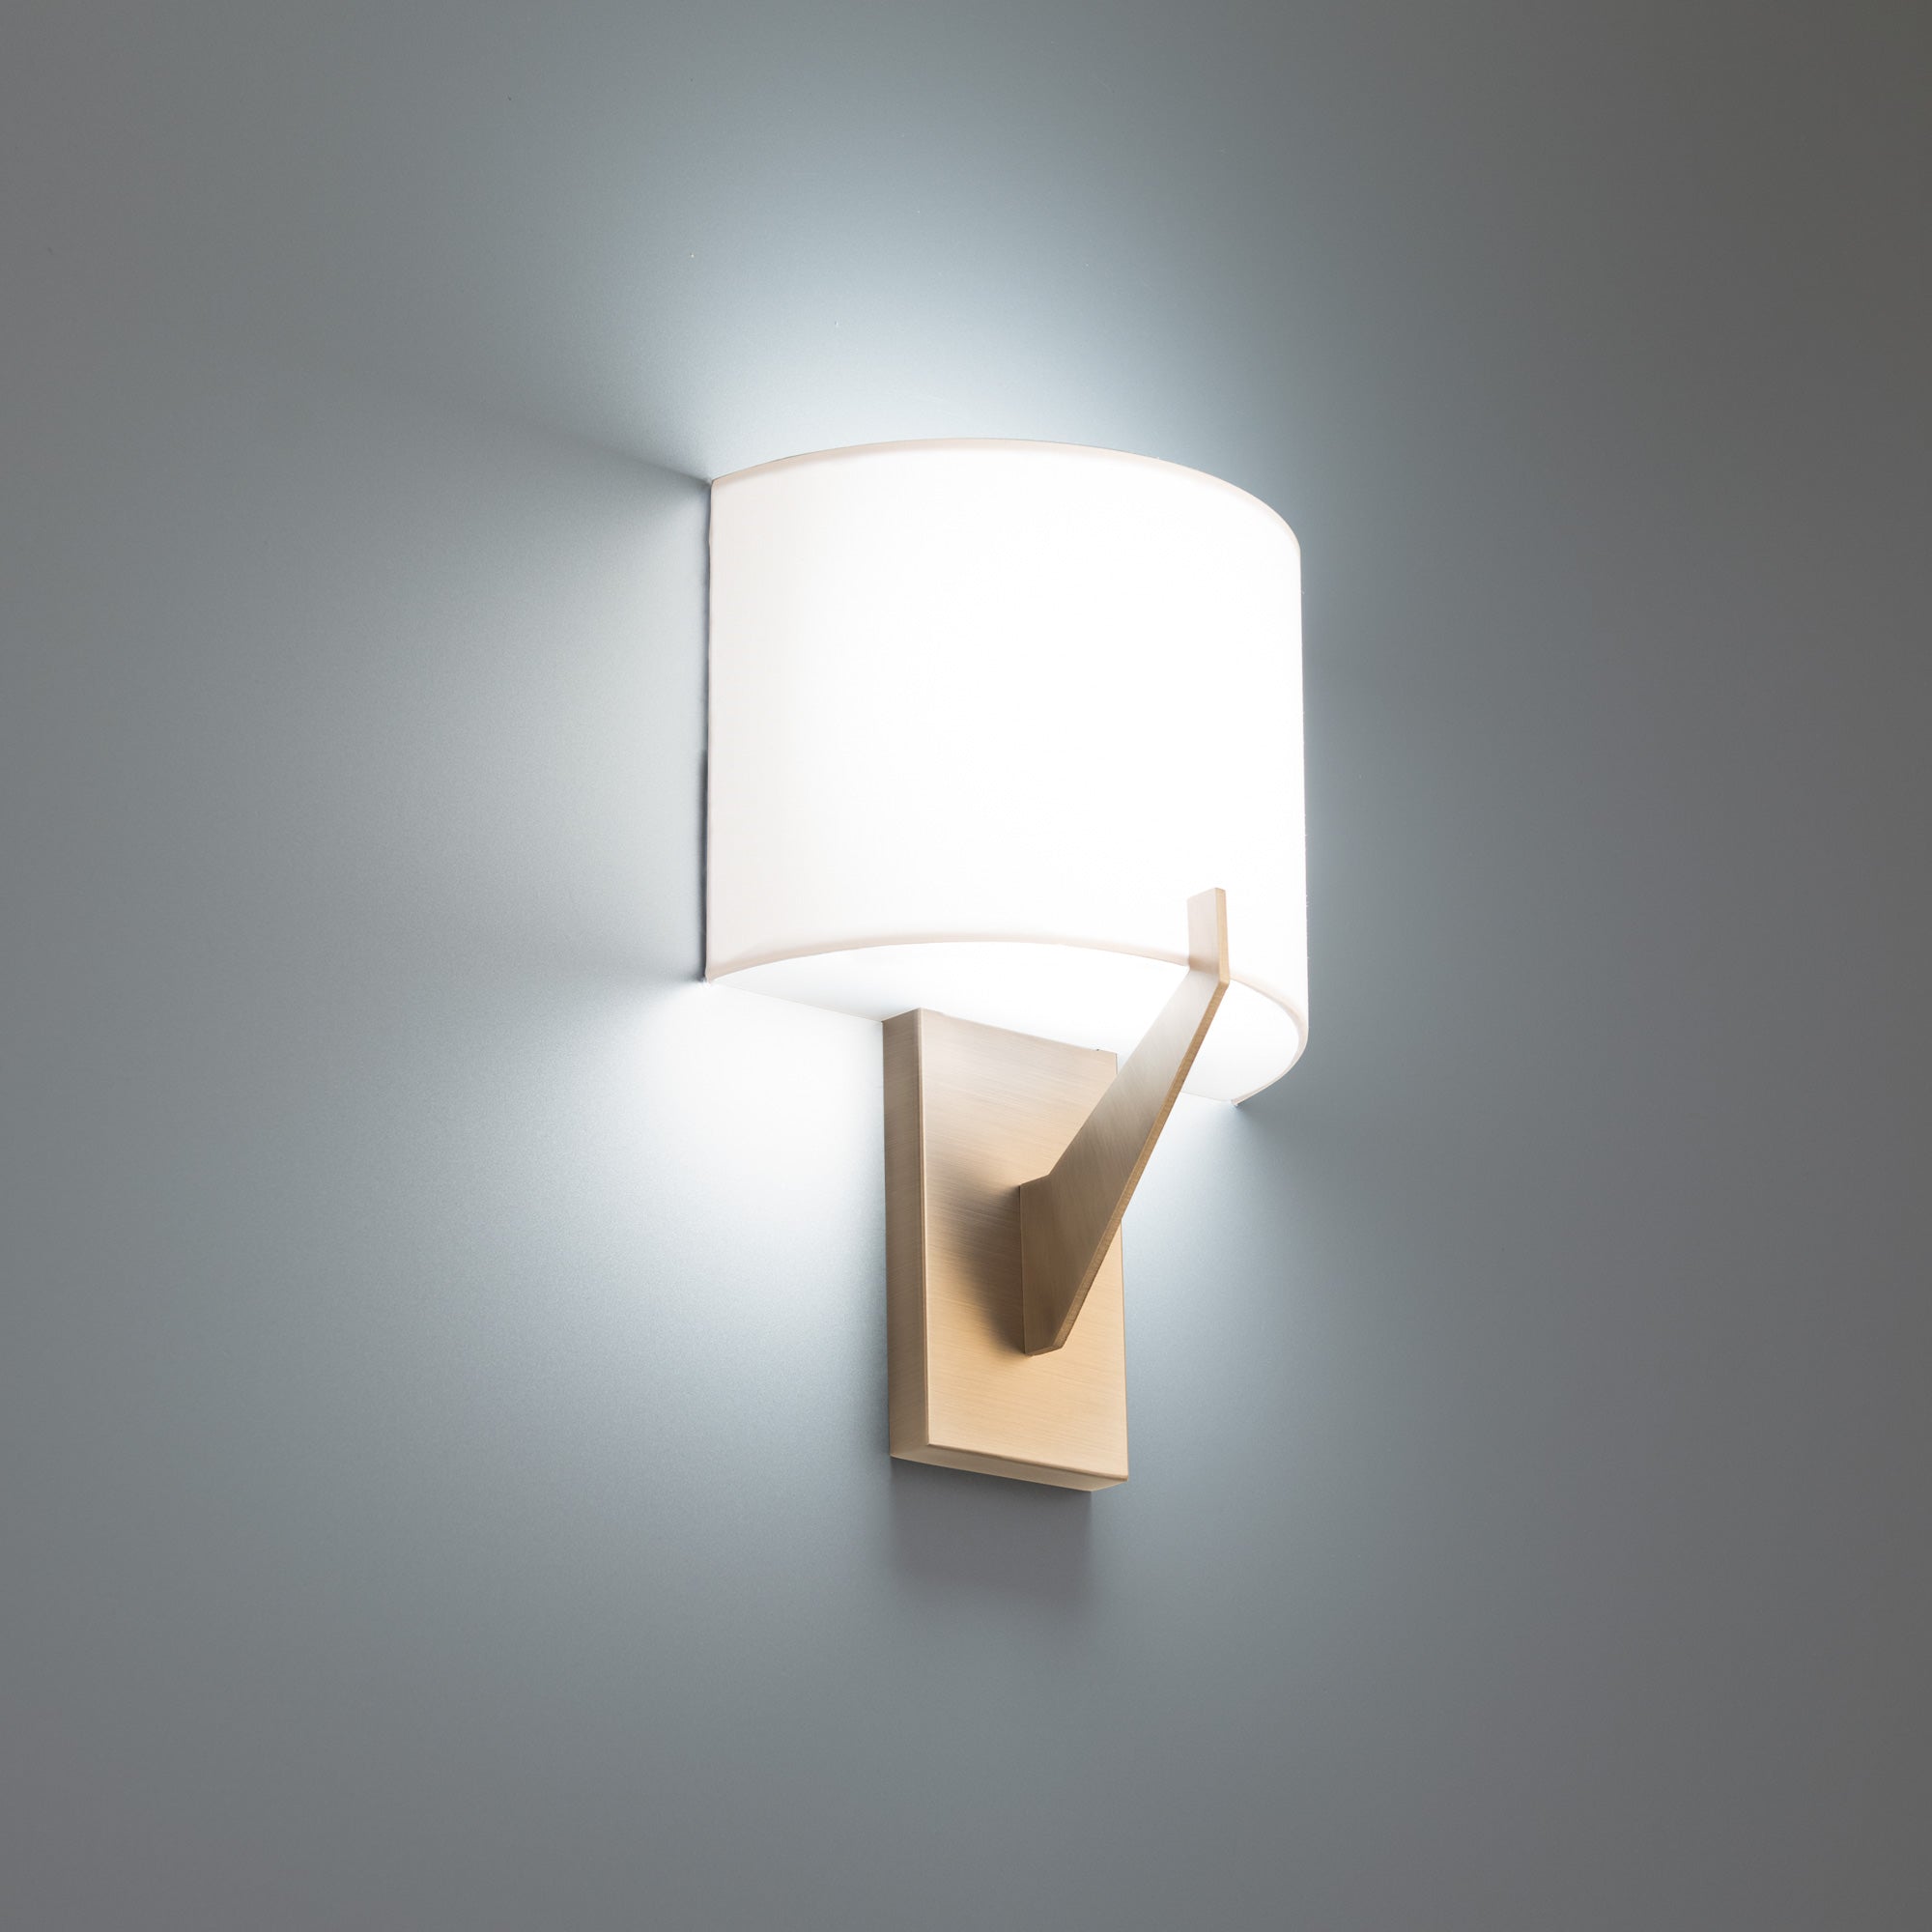 Fitzgerald 11" LED Wall Sconce